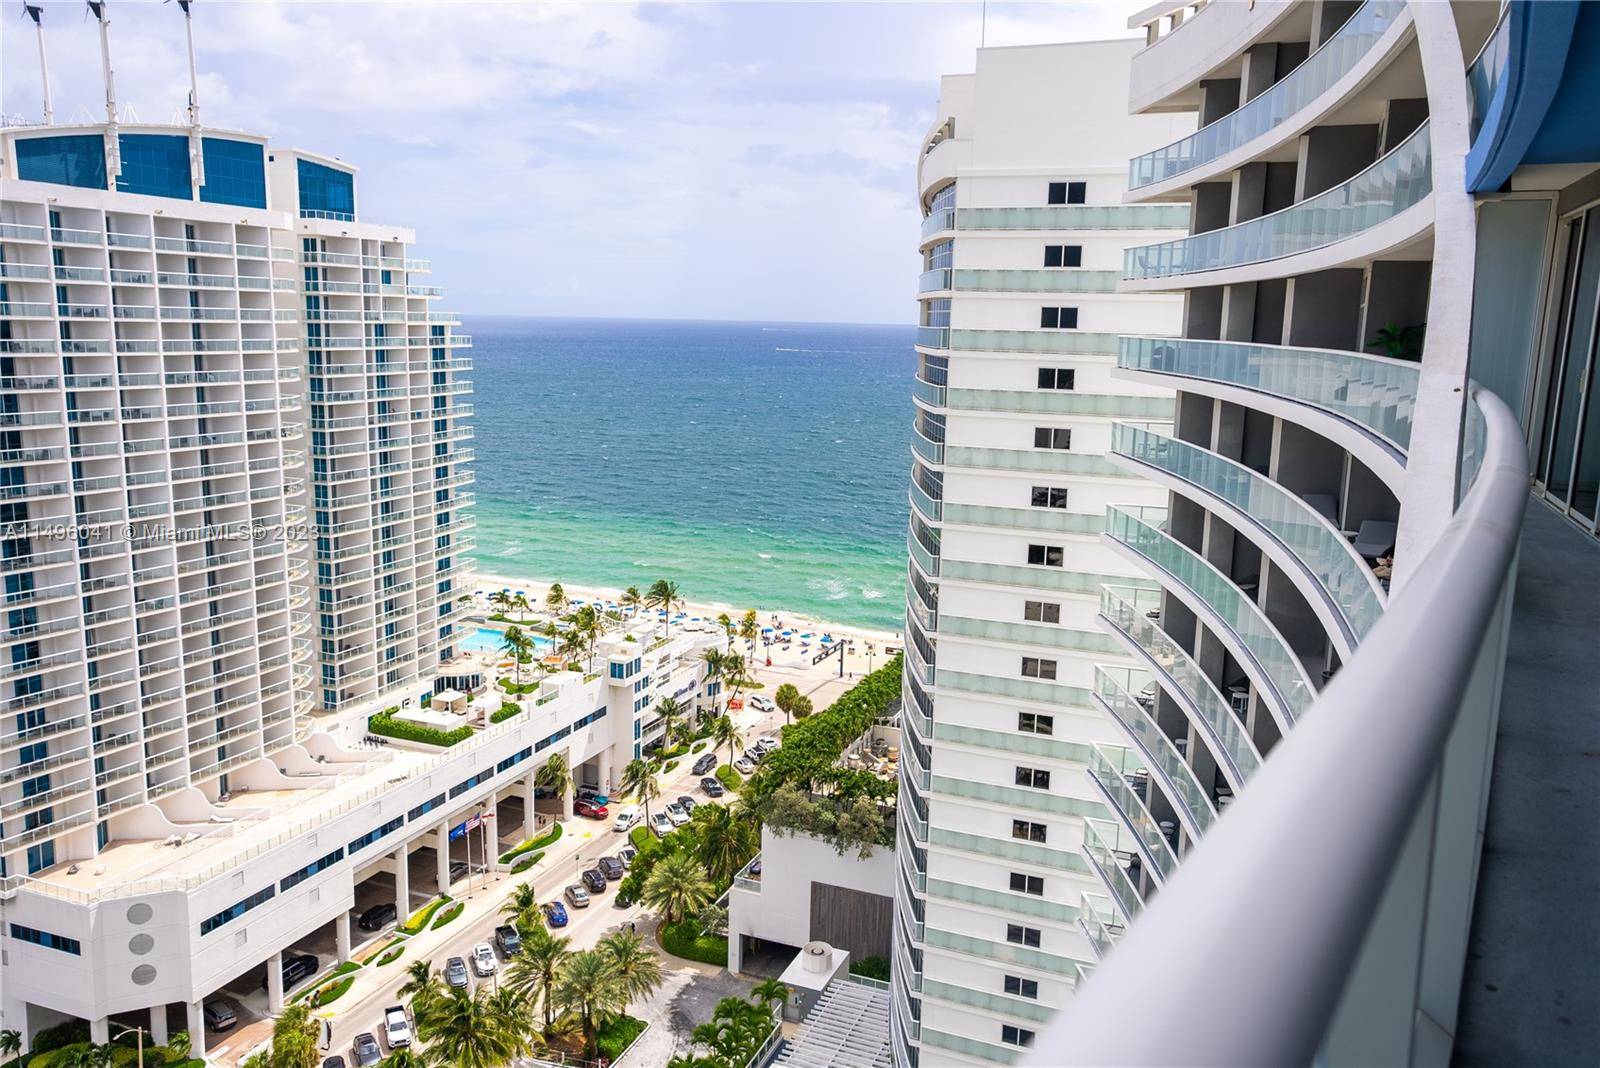 Amazing 2 Bedroom, 2 Bath fully furnished turnkey condo on the 22nd floor with beautiful ocean views at the Oceanfront W Residences on Ft Lauderdale Beach.